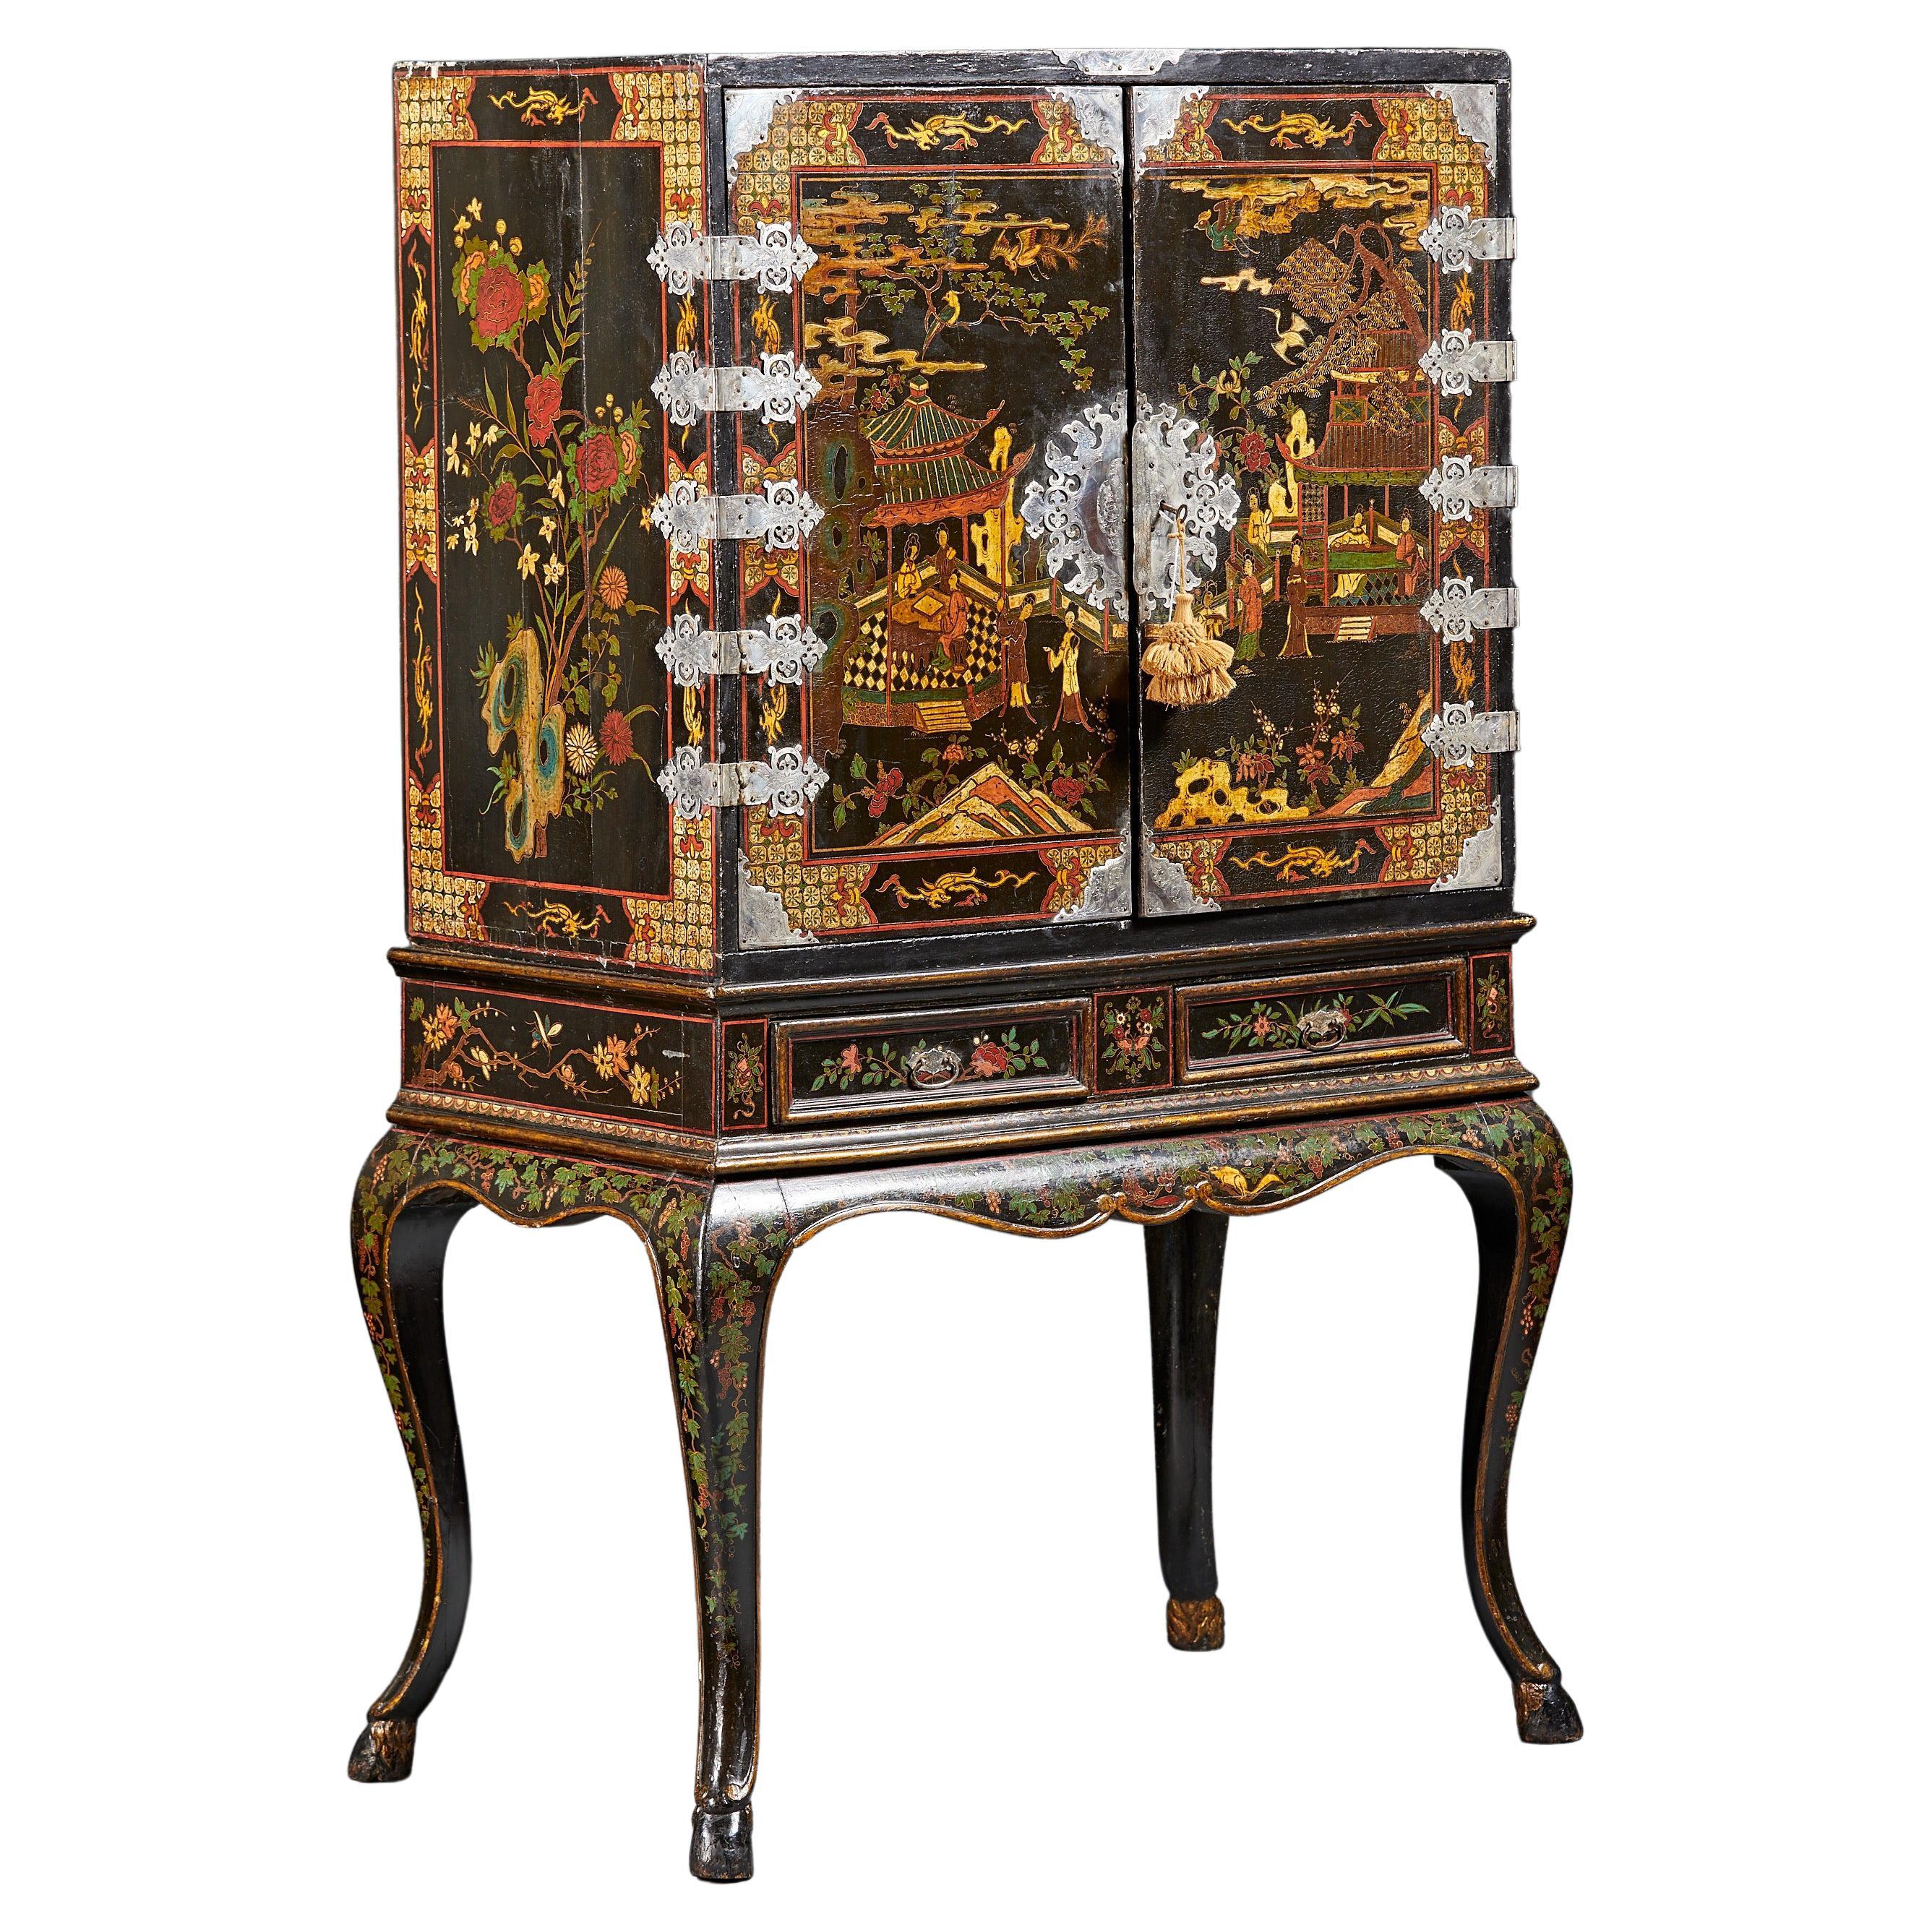 Extraordinary Chinoiserie Decorated Lacquered Cabinet, Circa 1730, Engliand